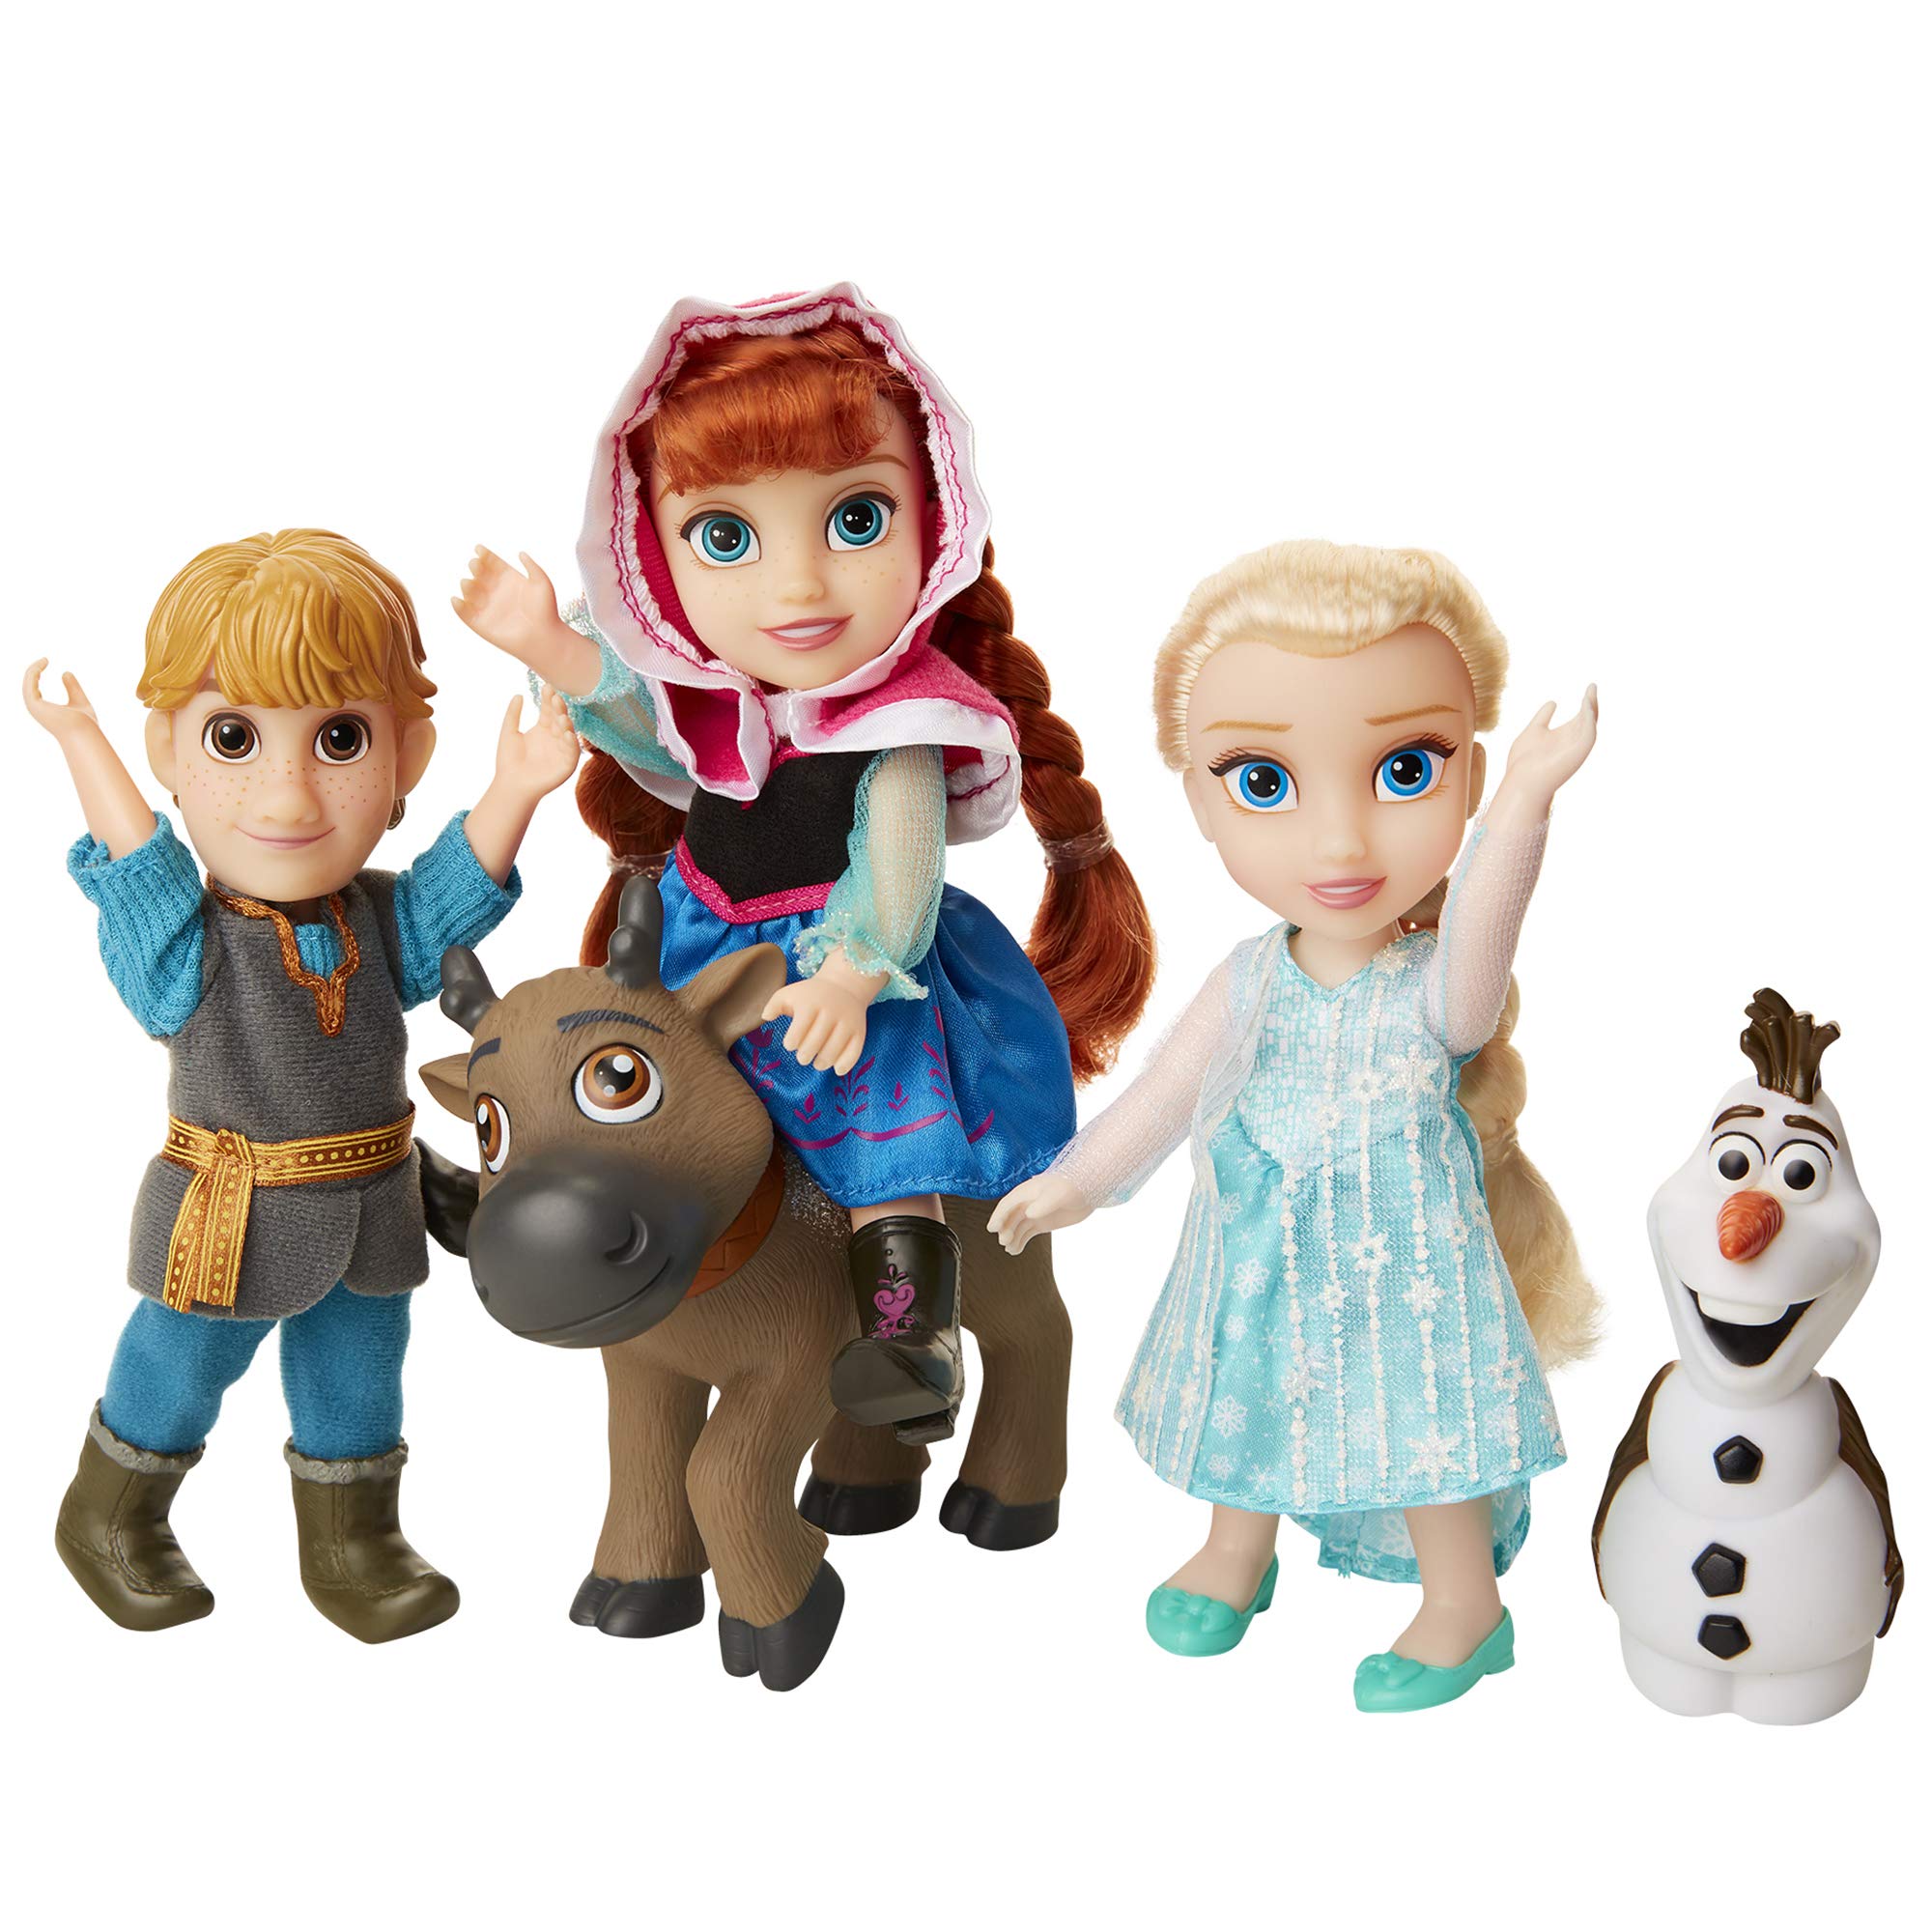 Disney Frozen Deluxe Petite Doll Gift Set - Includes Anna, Elsa, Kristoff, Sven and Olaf! Dolls are Approximately 6 inches Tall - Perfect for Any Frozen Fan!